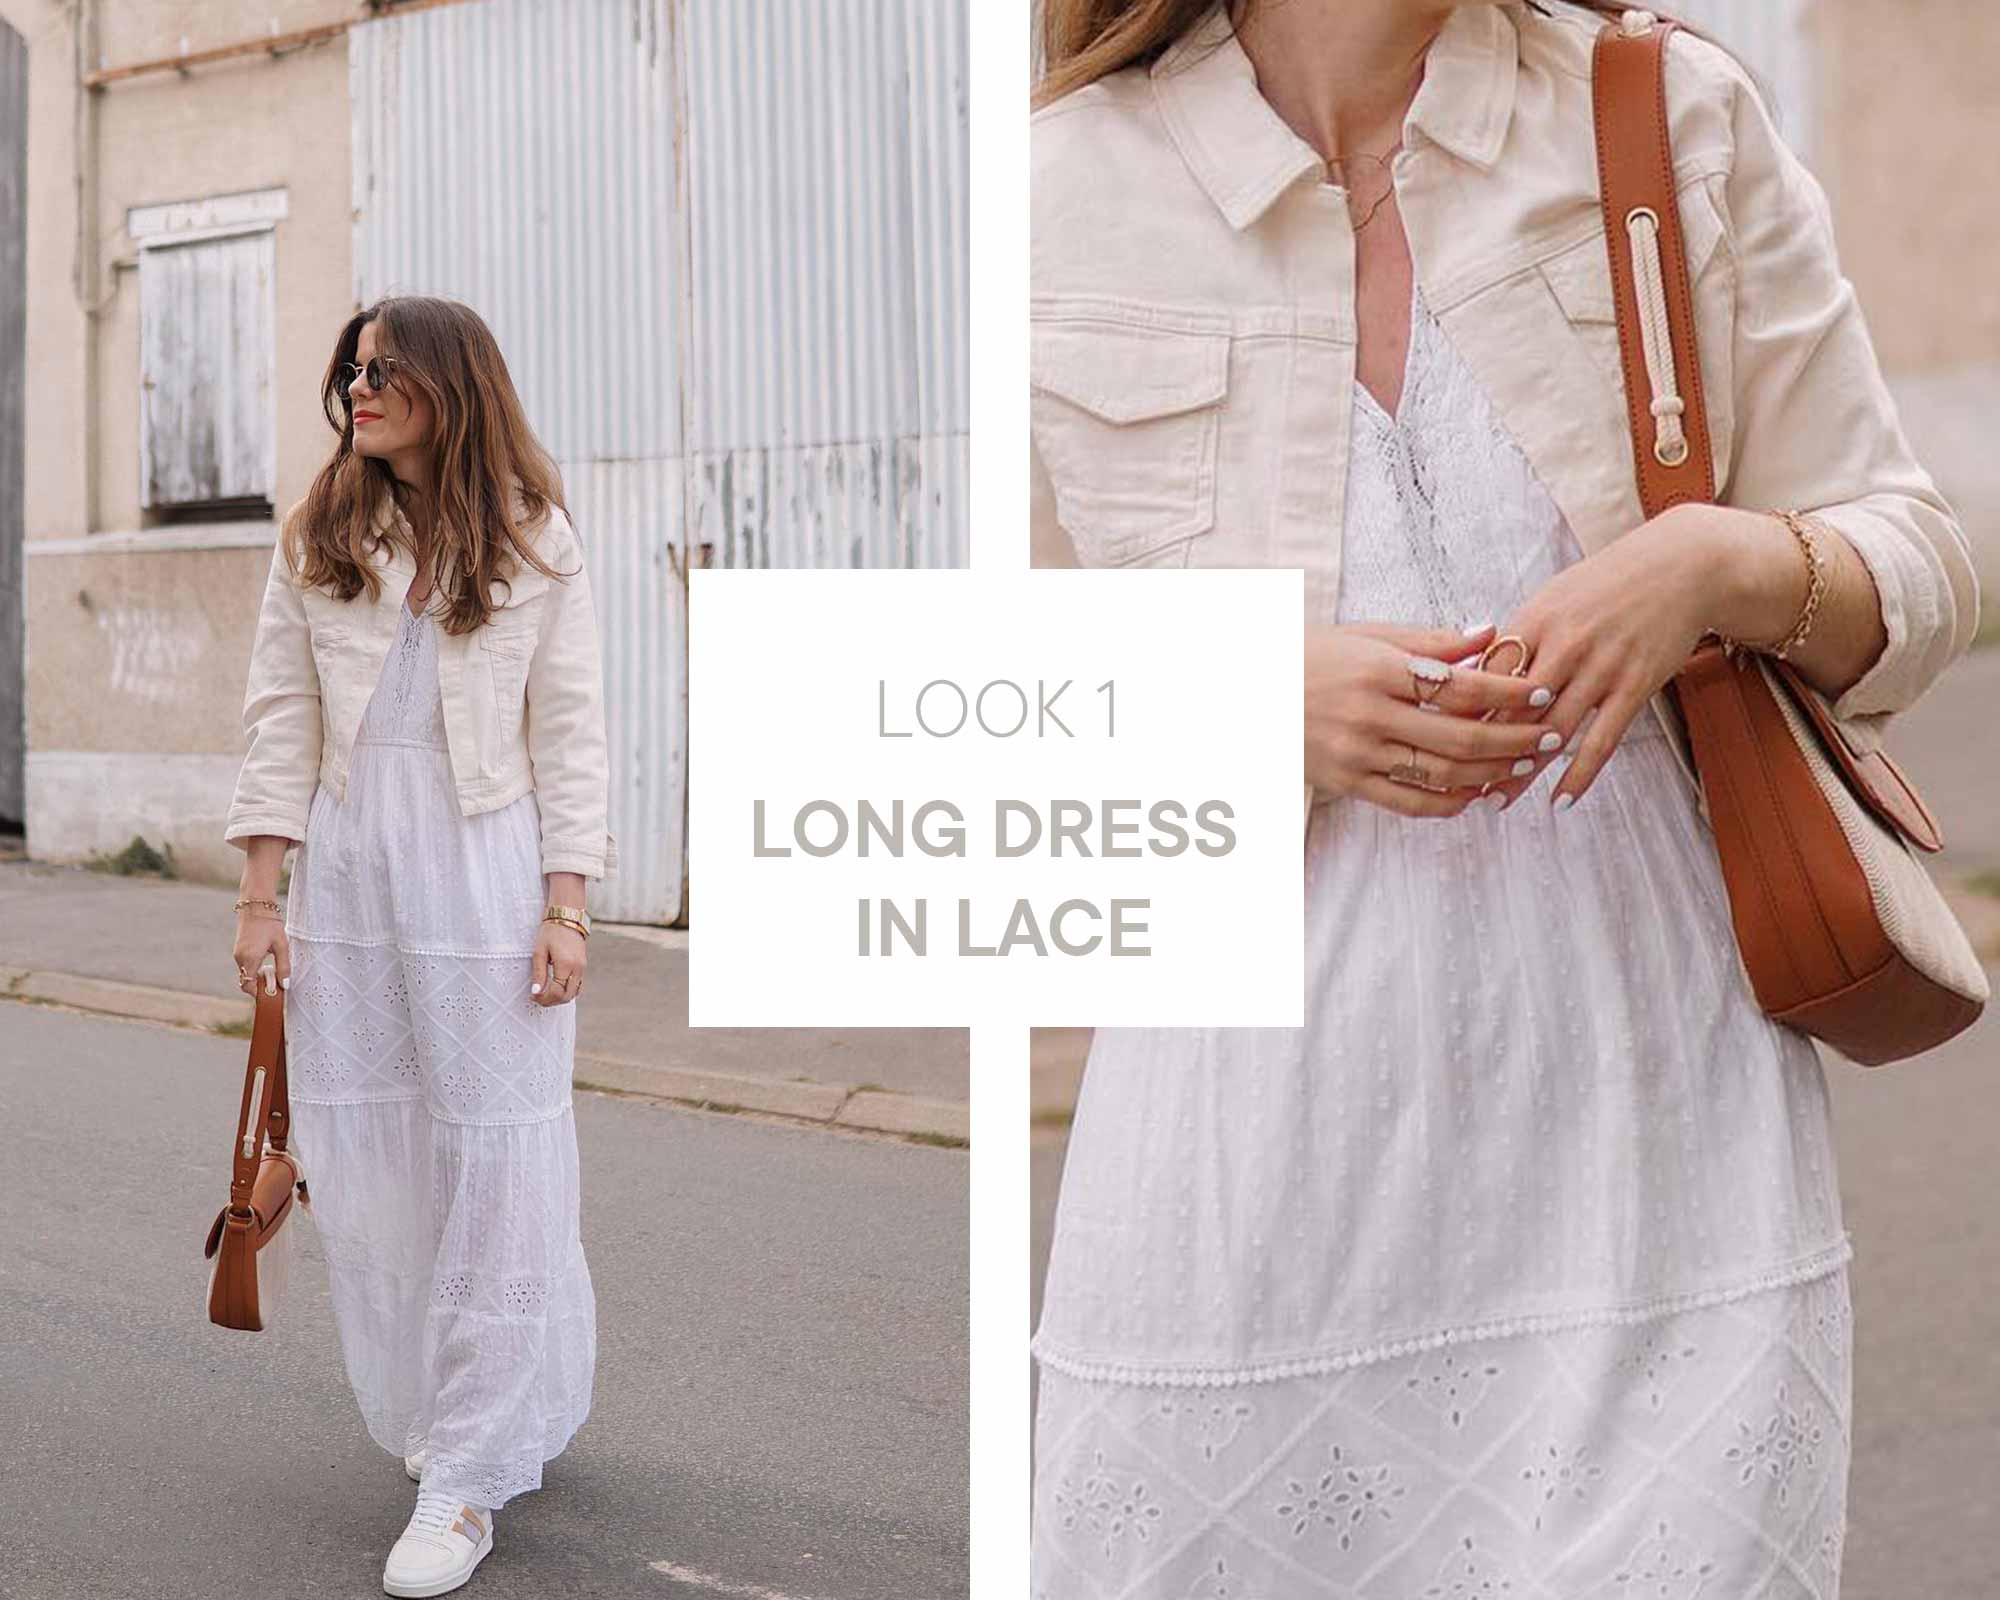 Alexia wearing a long white dress with cream white jacket and white shoes. Wearing a brown shoulder bag and retro sunglasses.